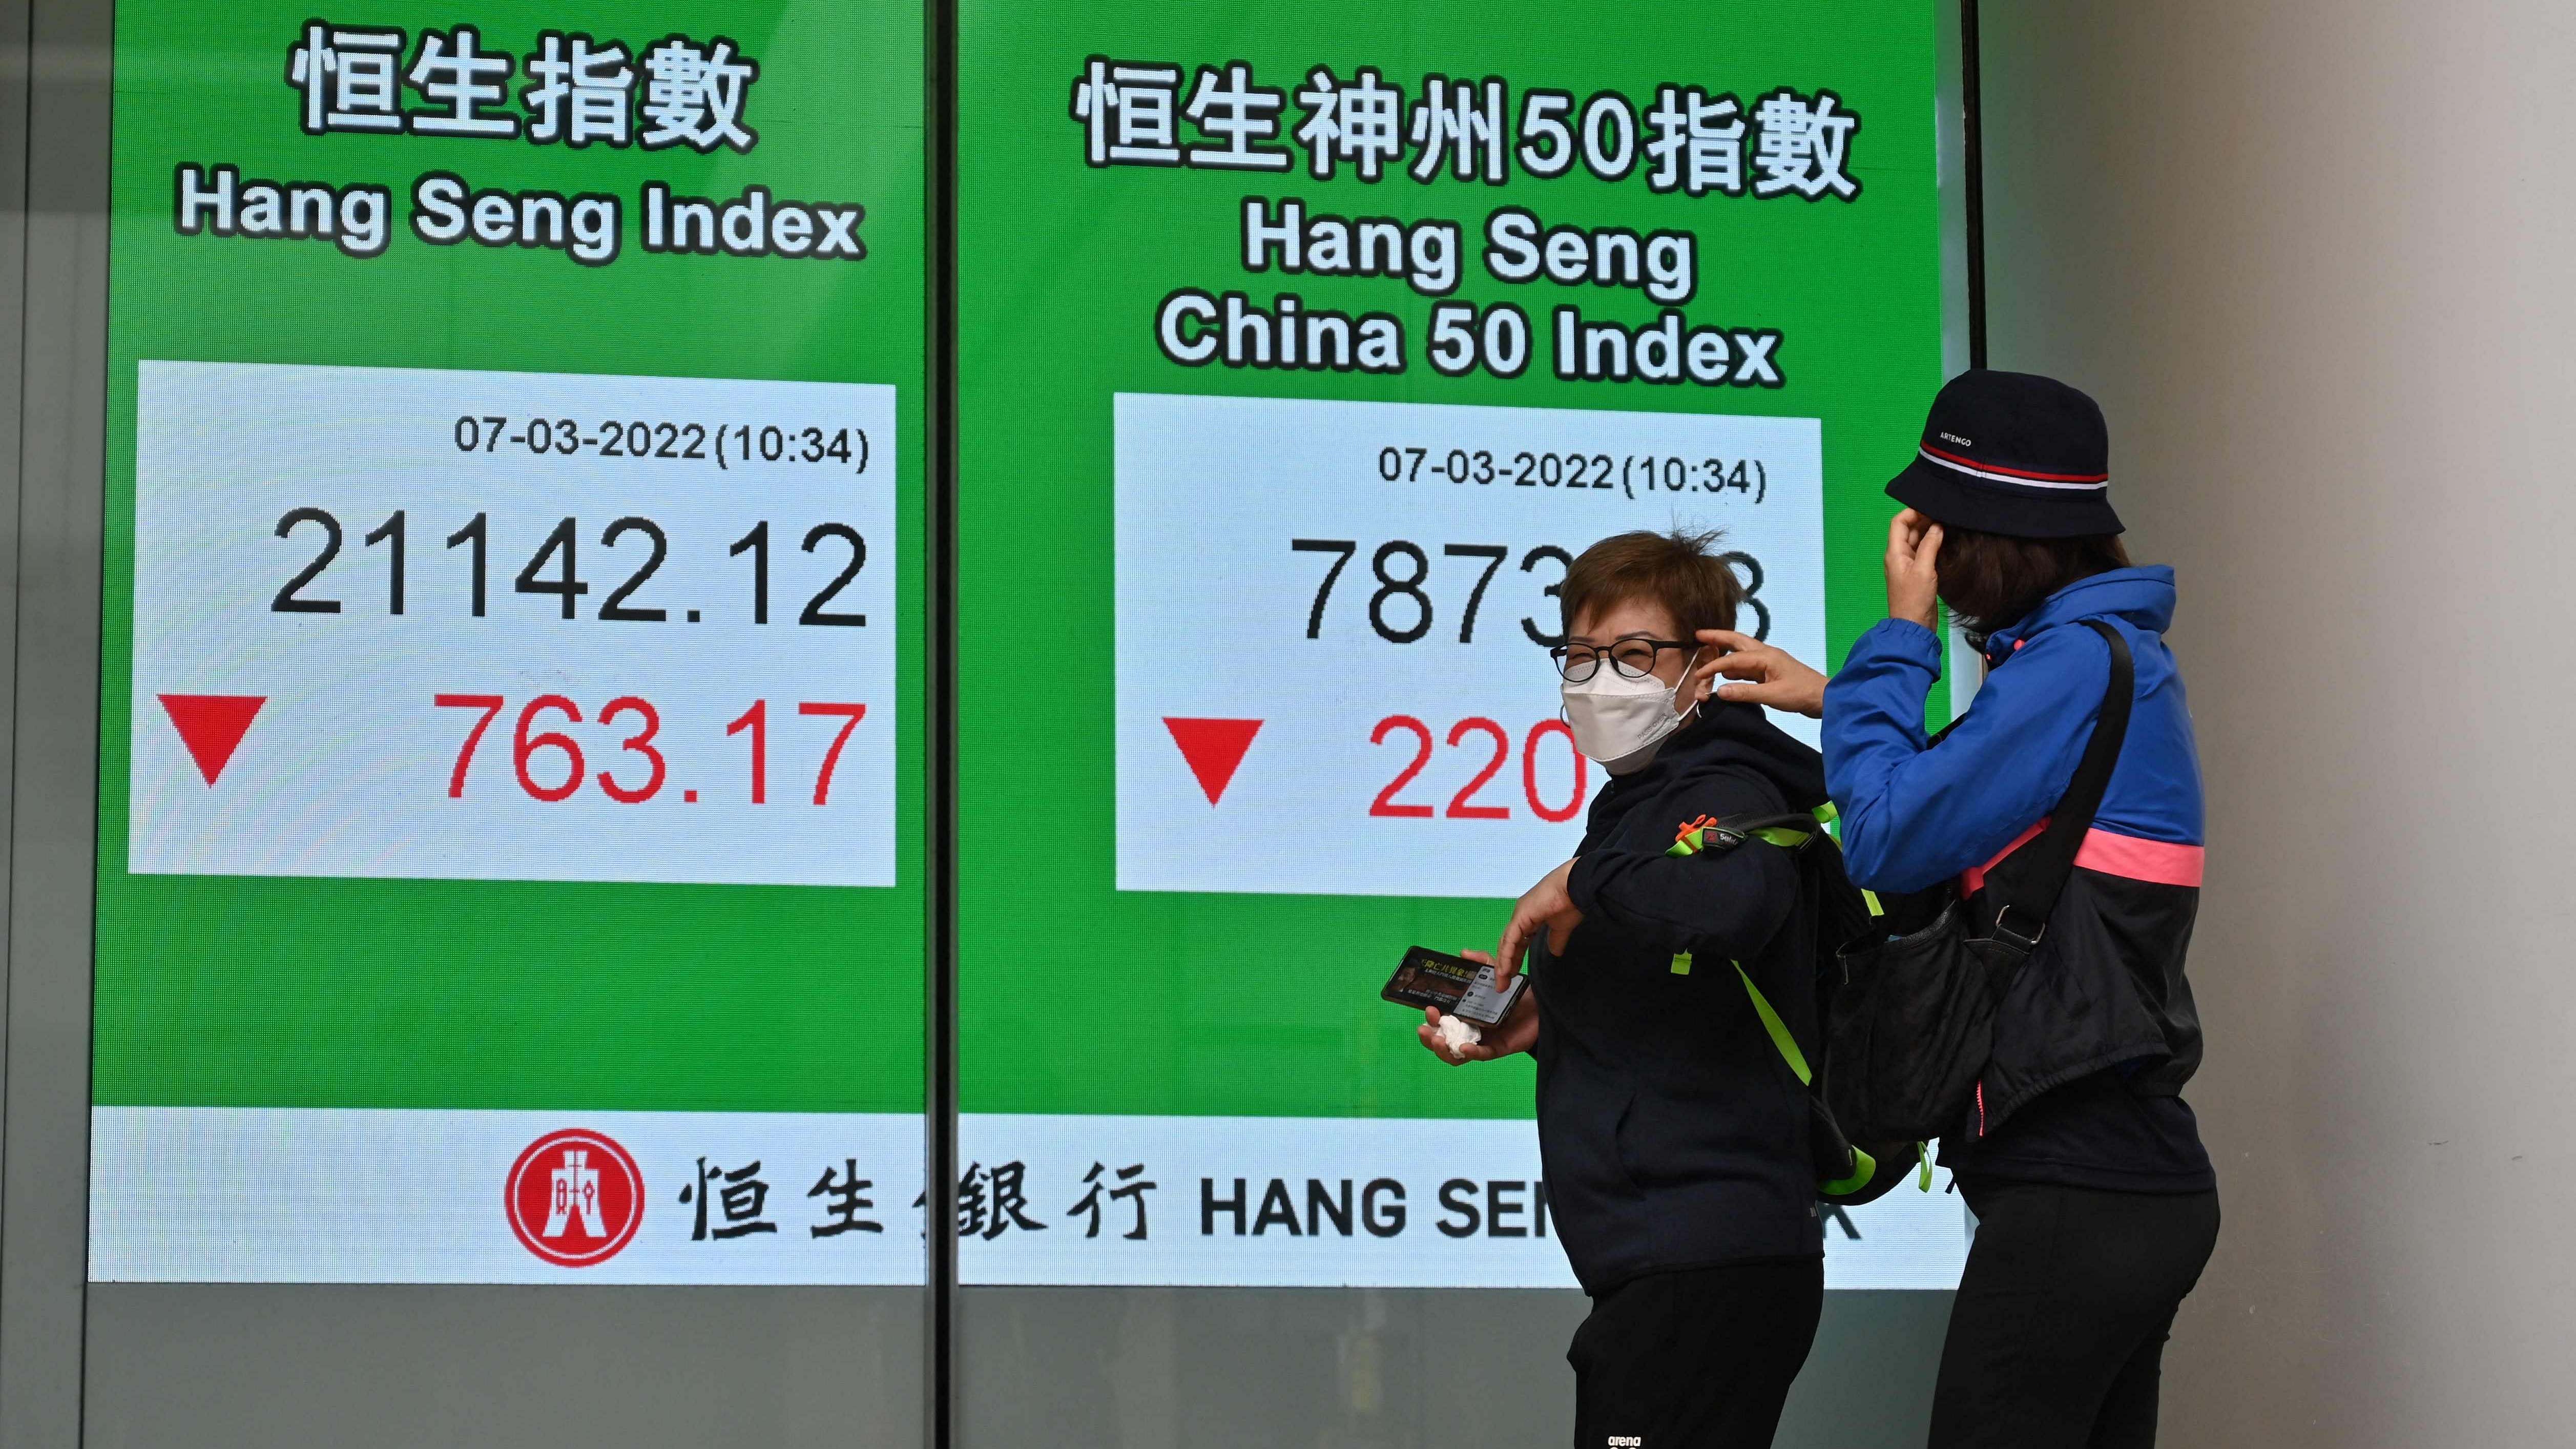 MSCI's broadest index of Asia-Pacific shares outside Japan was up 0.17 per cent while Japan's Nikkei and Seoul's KOSPI index were 0.32 per cent and 0.01 per cent higher respectively. Credit: AFP Photo